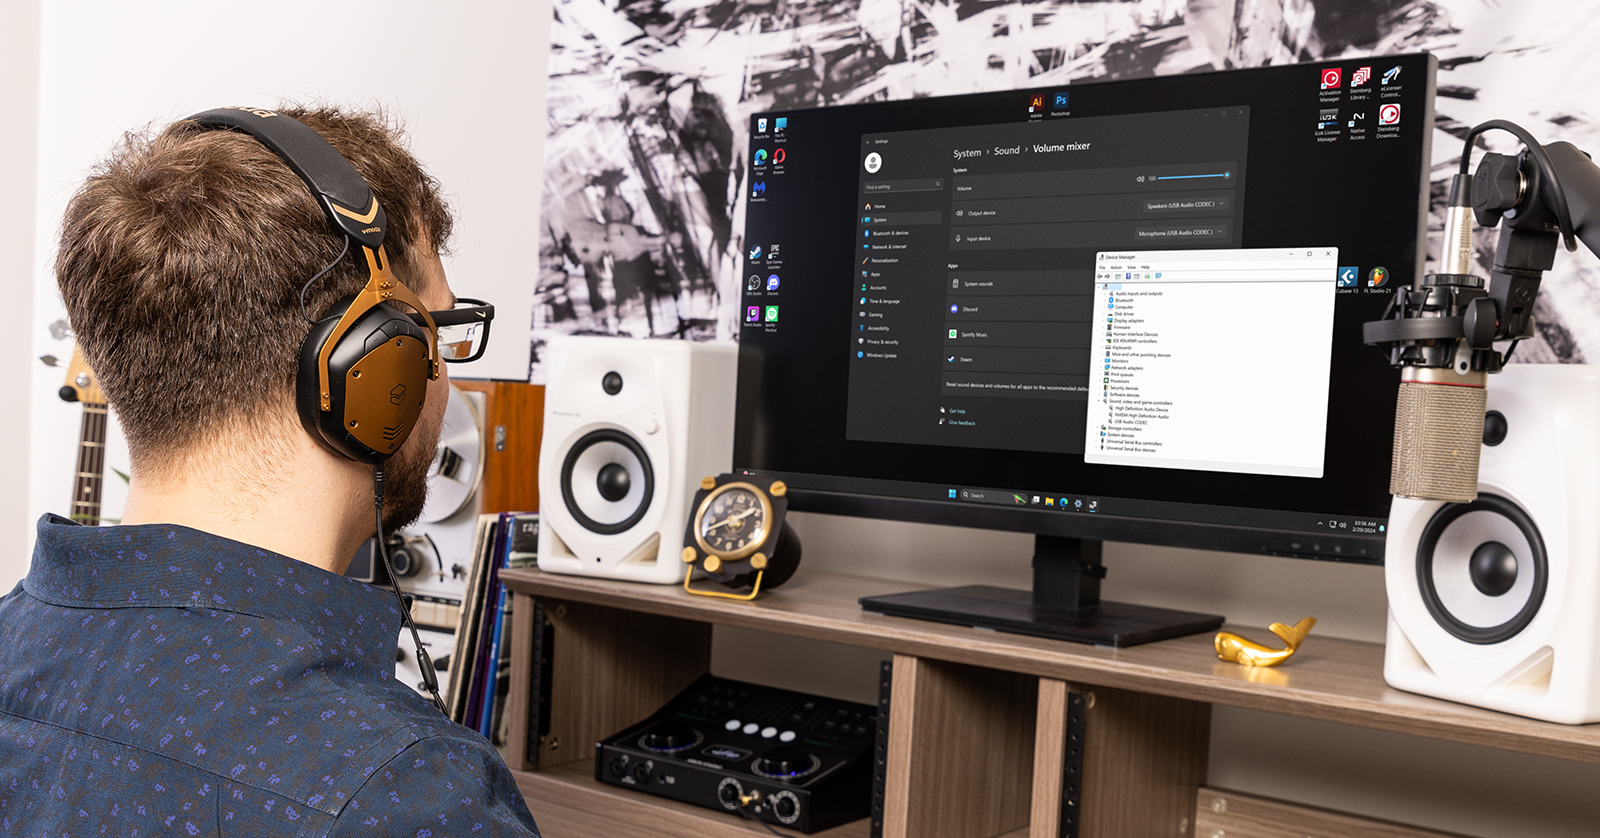 person wearing headphones using a Windows PC